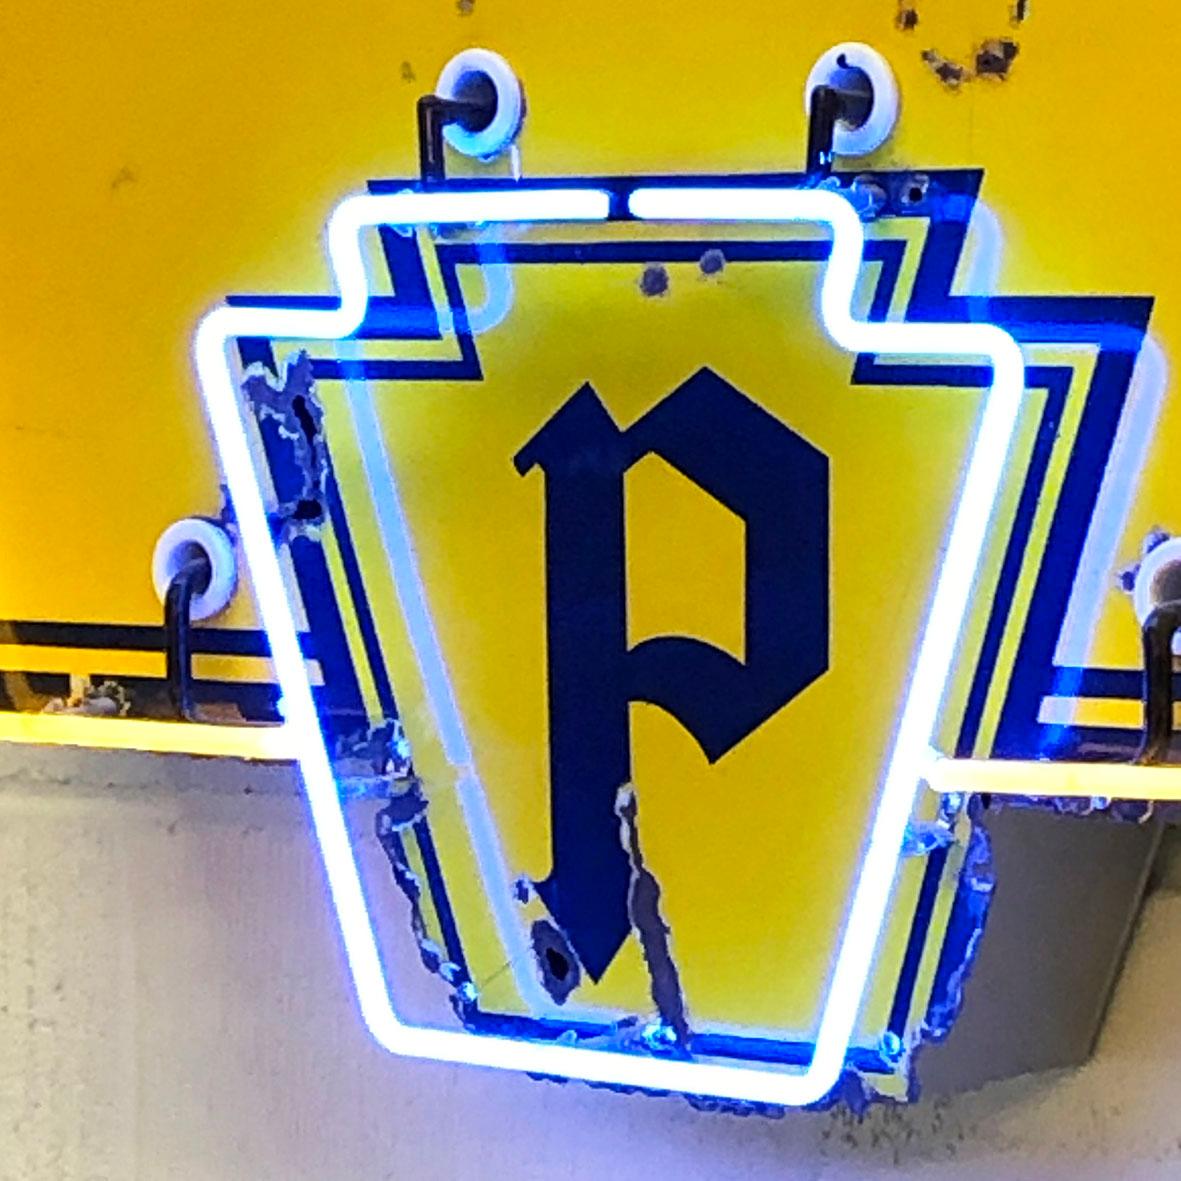 Extremely rare original 1950s Pennsylvania Tires neon sign

How could it happen? Someone sits down to create a spectacular neon sign promoting a well known American tyre supplier and they don’t even bother to run the spell checker on the finished